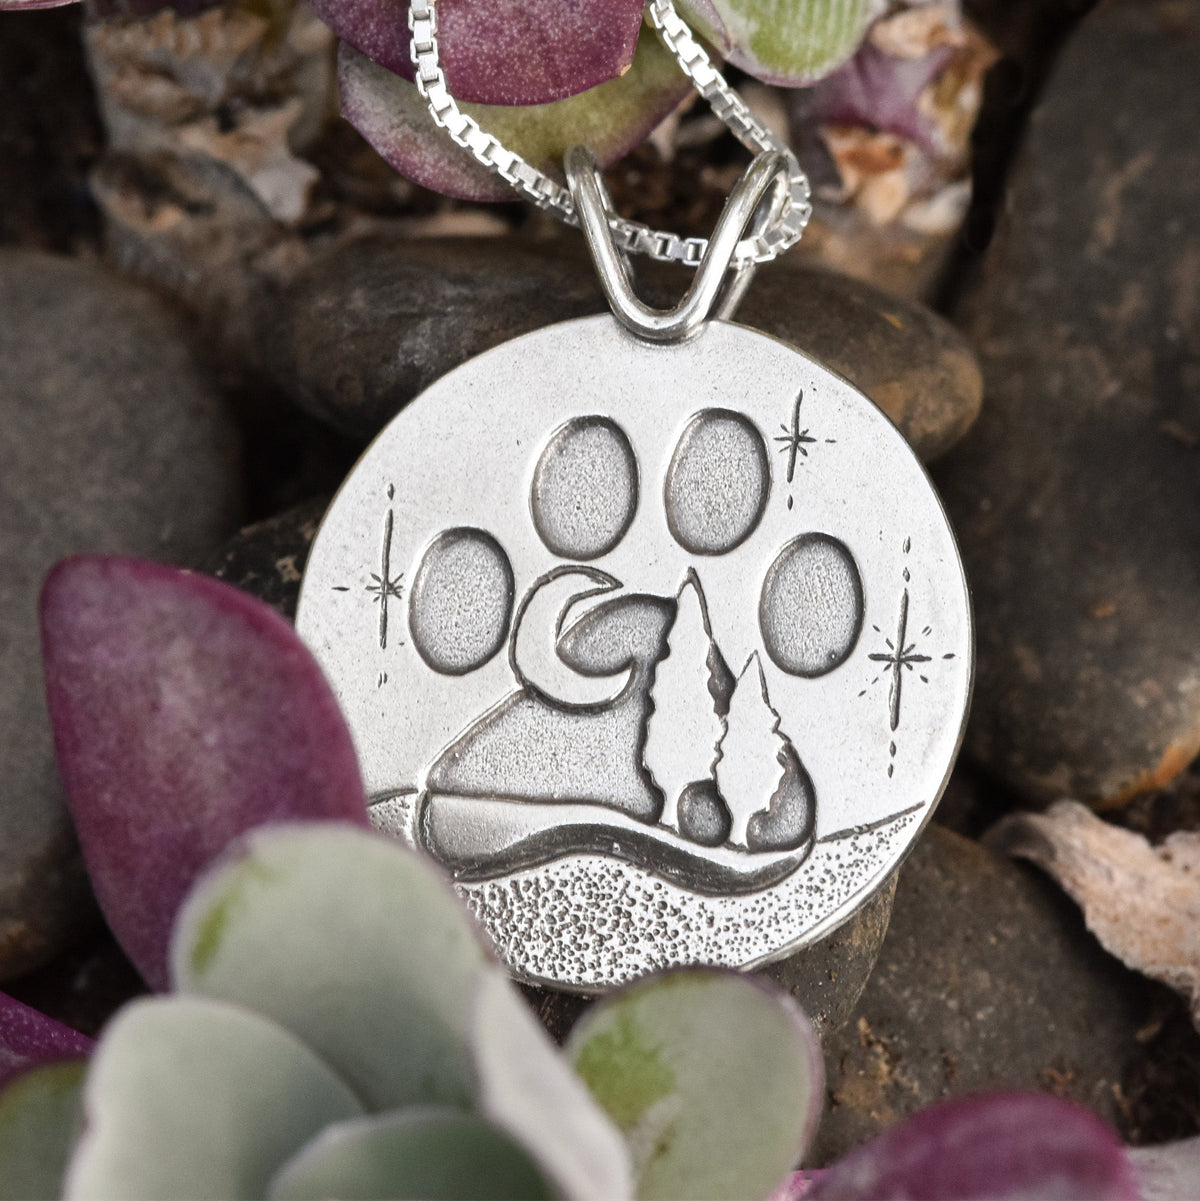 Forever Home Pendant - Fundraiser for UPAWS - Silver Pendant   7133 - handmade by Beth Millner Jewelry